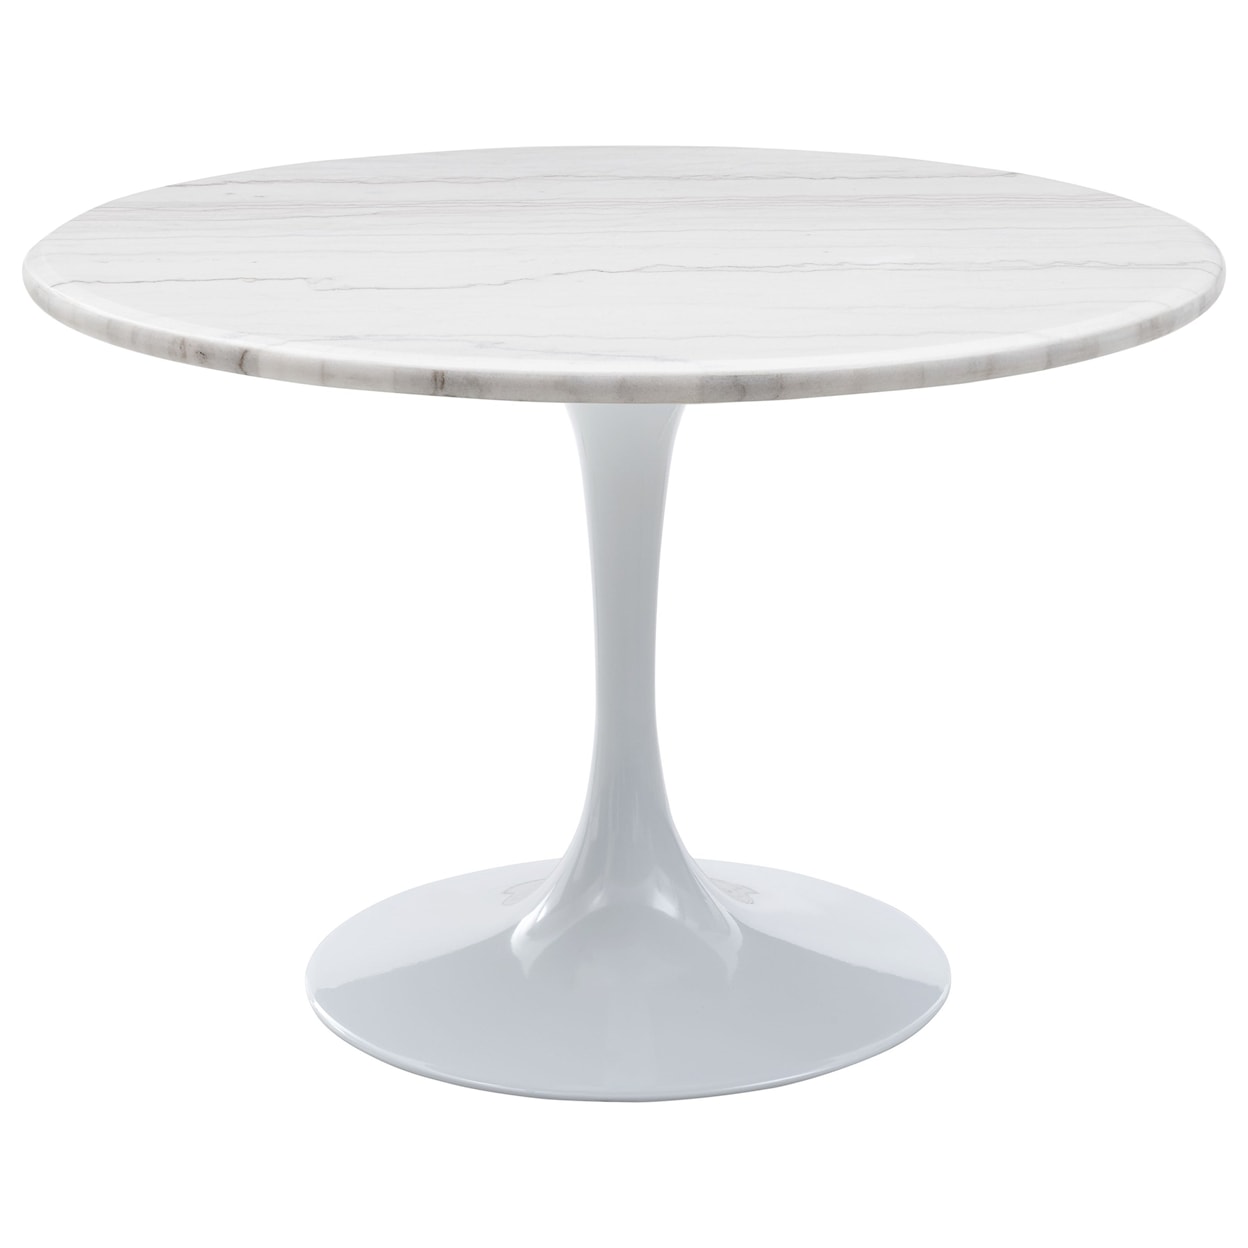 Belfort Essentials Colfax Table - White Top & White Base